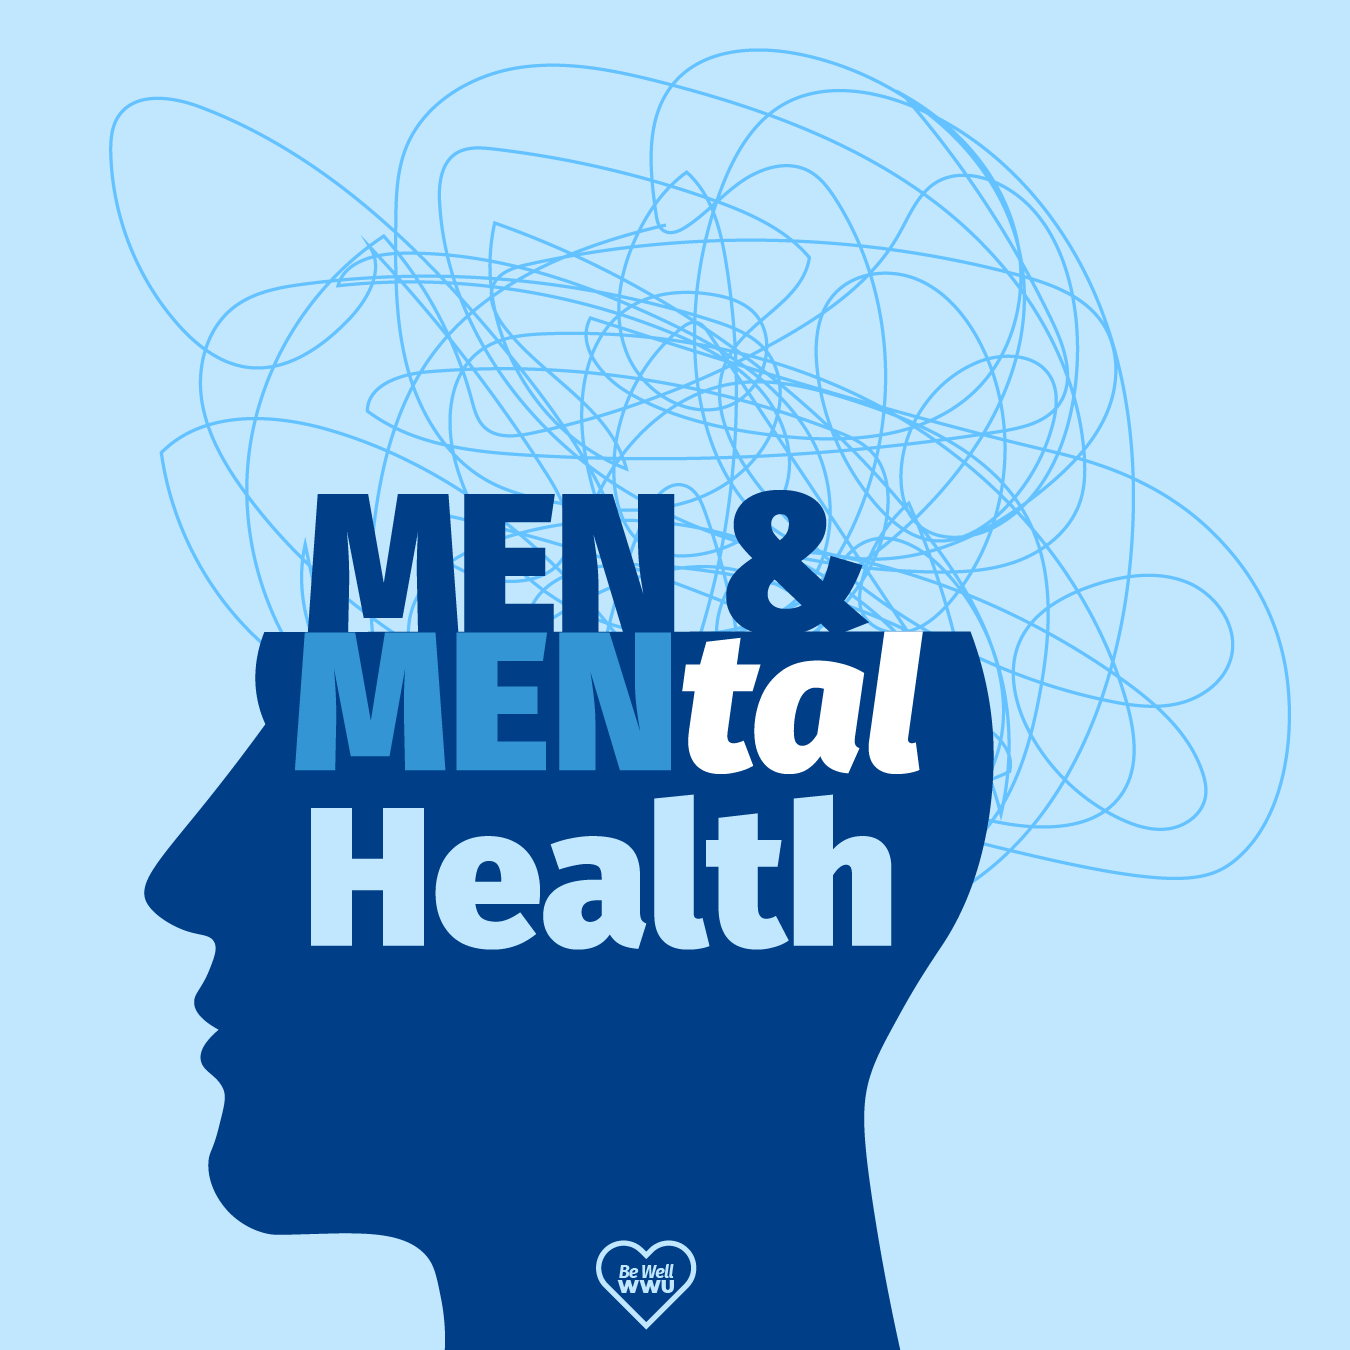 All about Mental Health